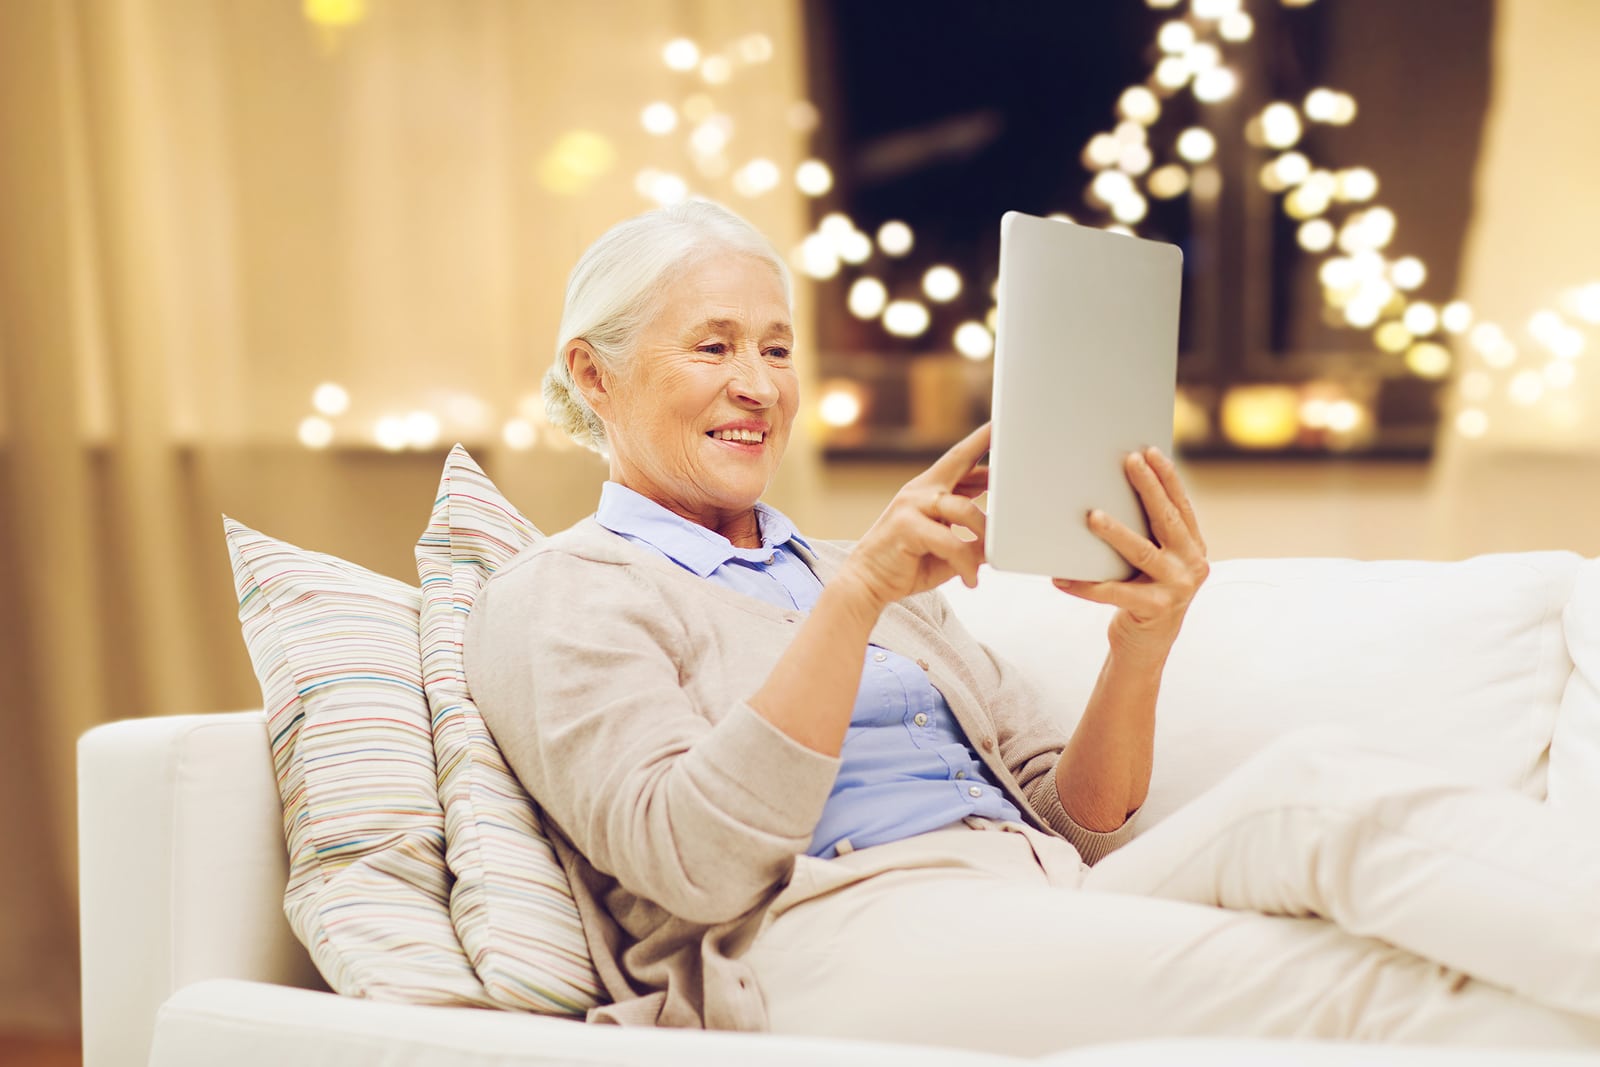 Social Seniors: Stay Connected